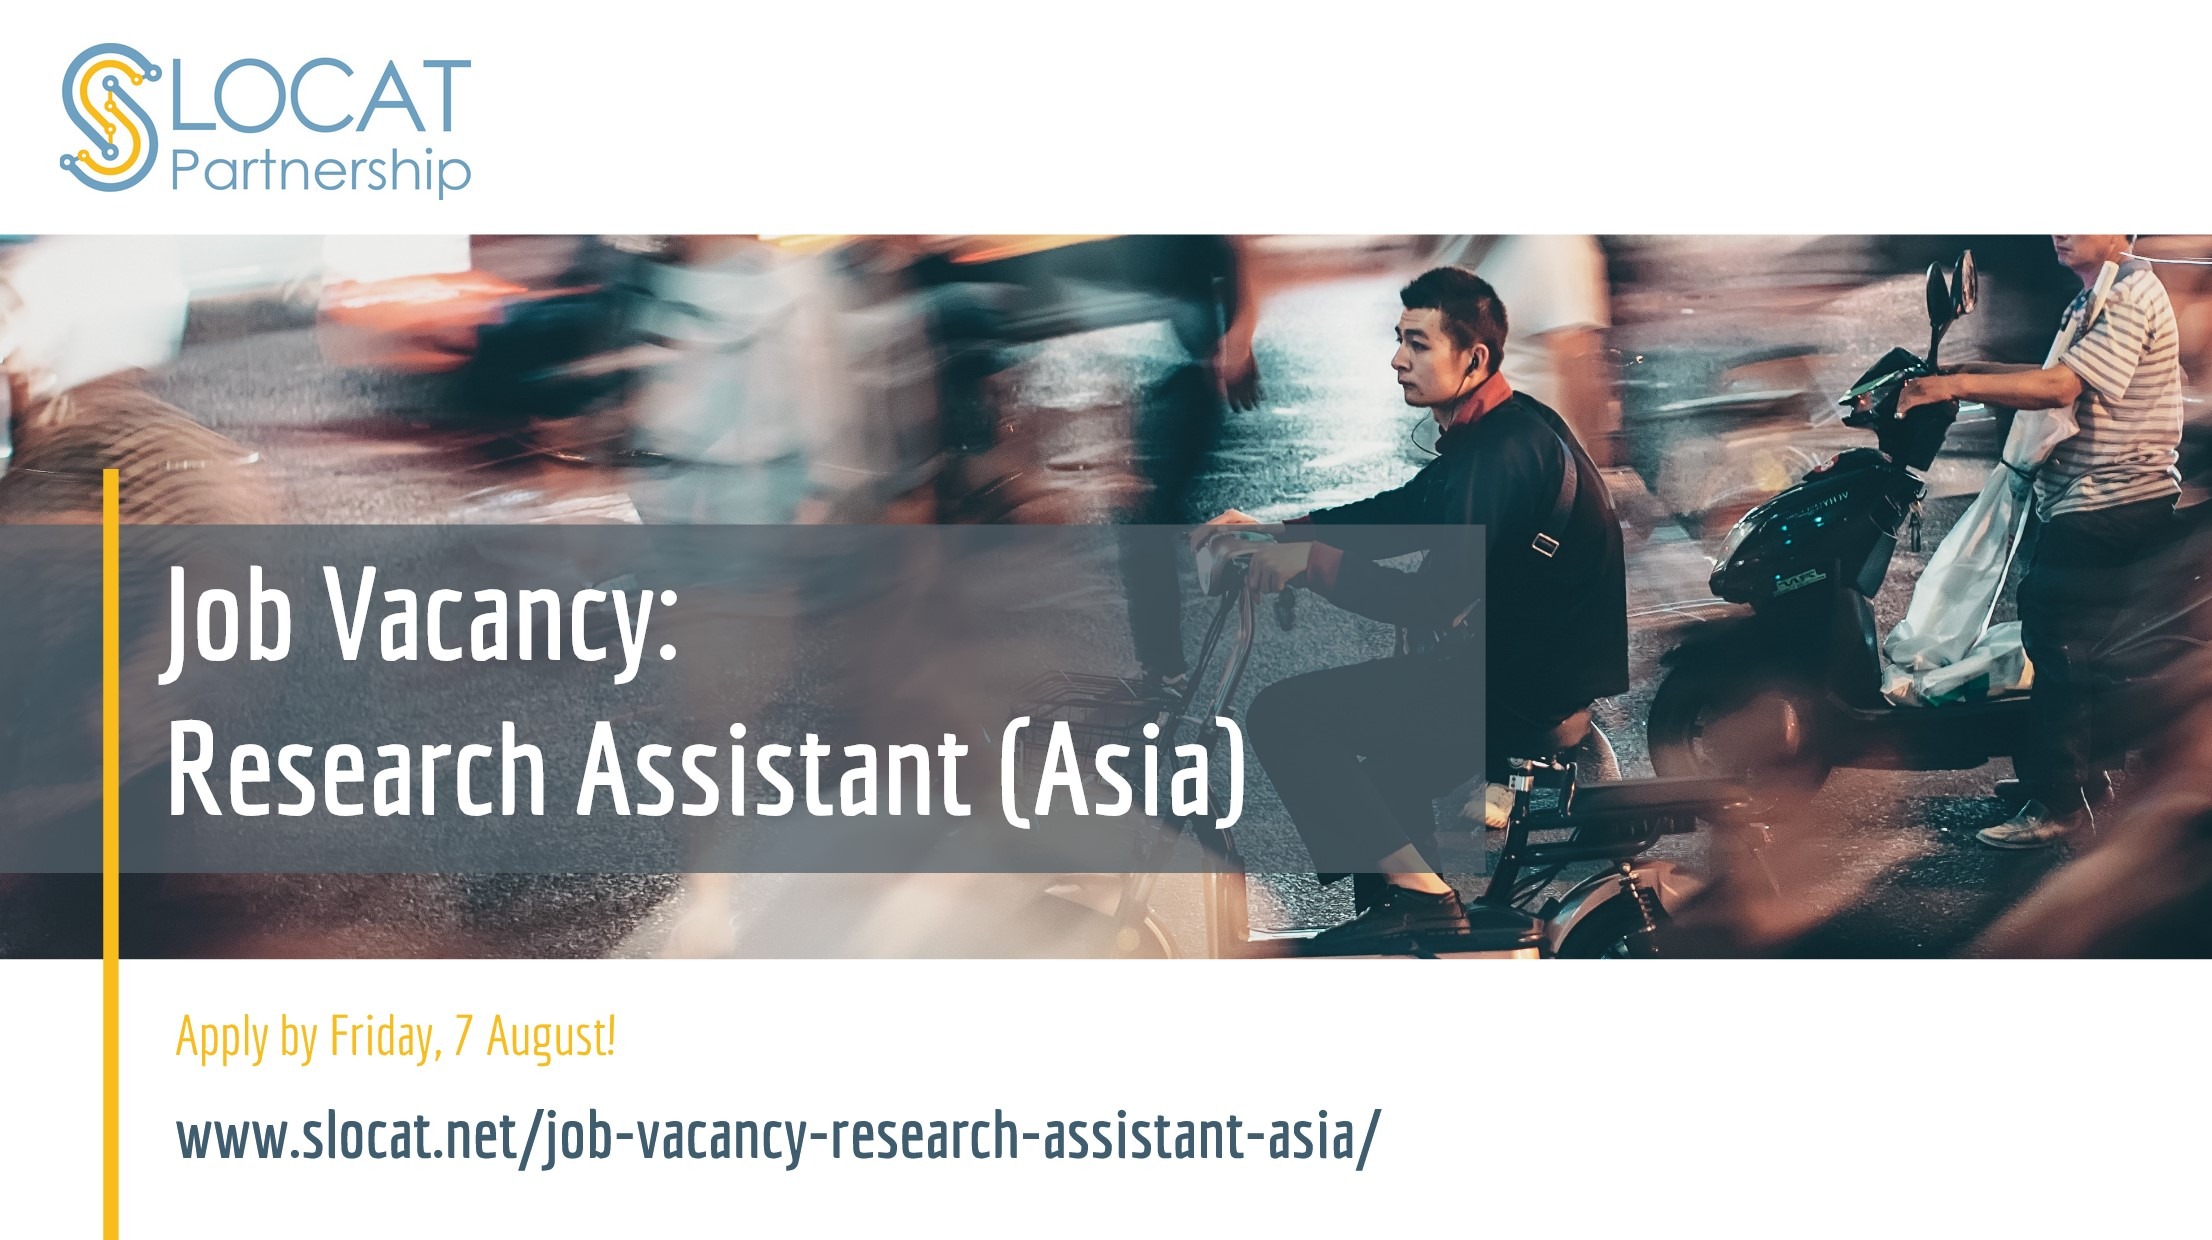 Job Vacancy: Research Assistant (Asia)